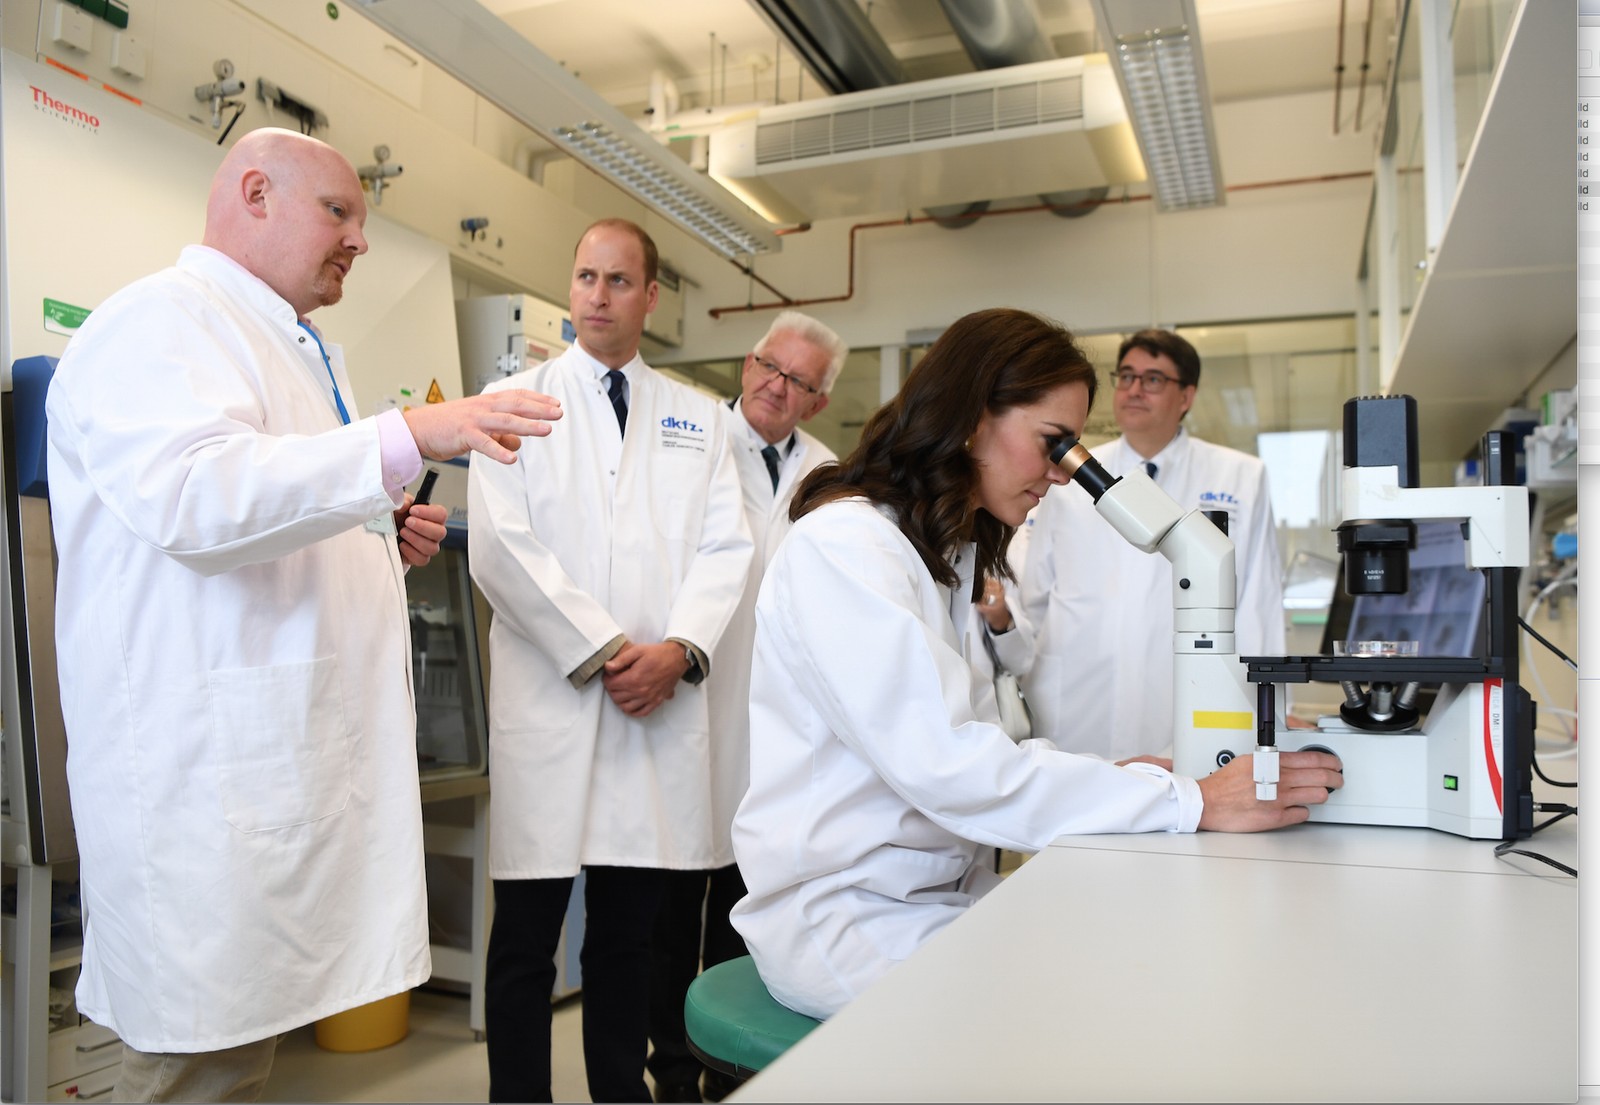 Prince William and Duchess Catherine during their visit of the HI-STEM labs in 2017